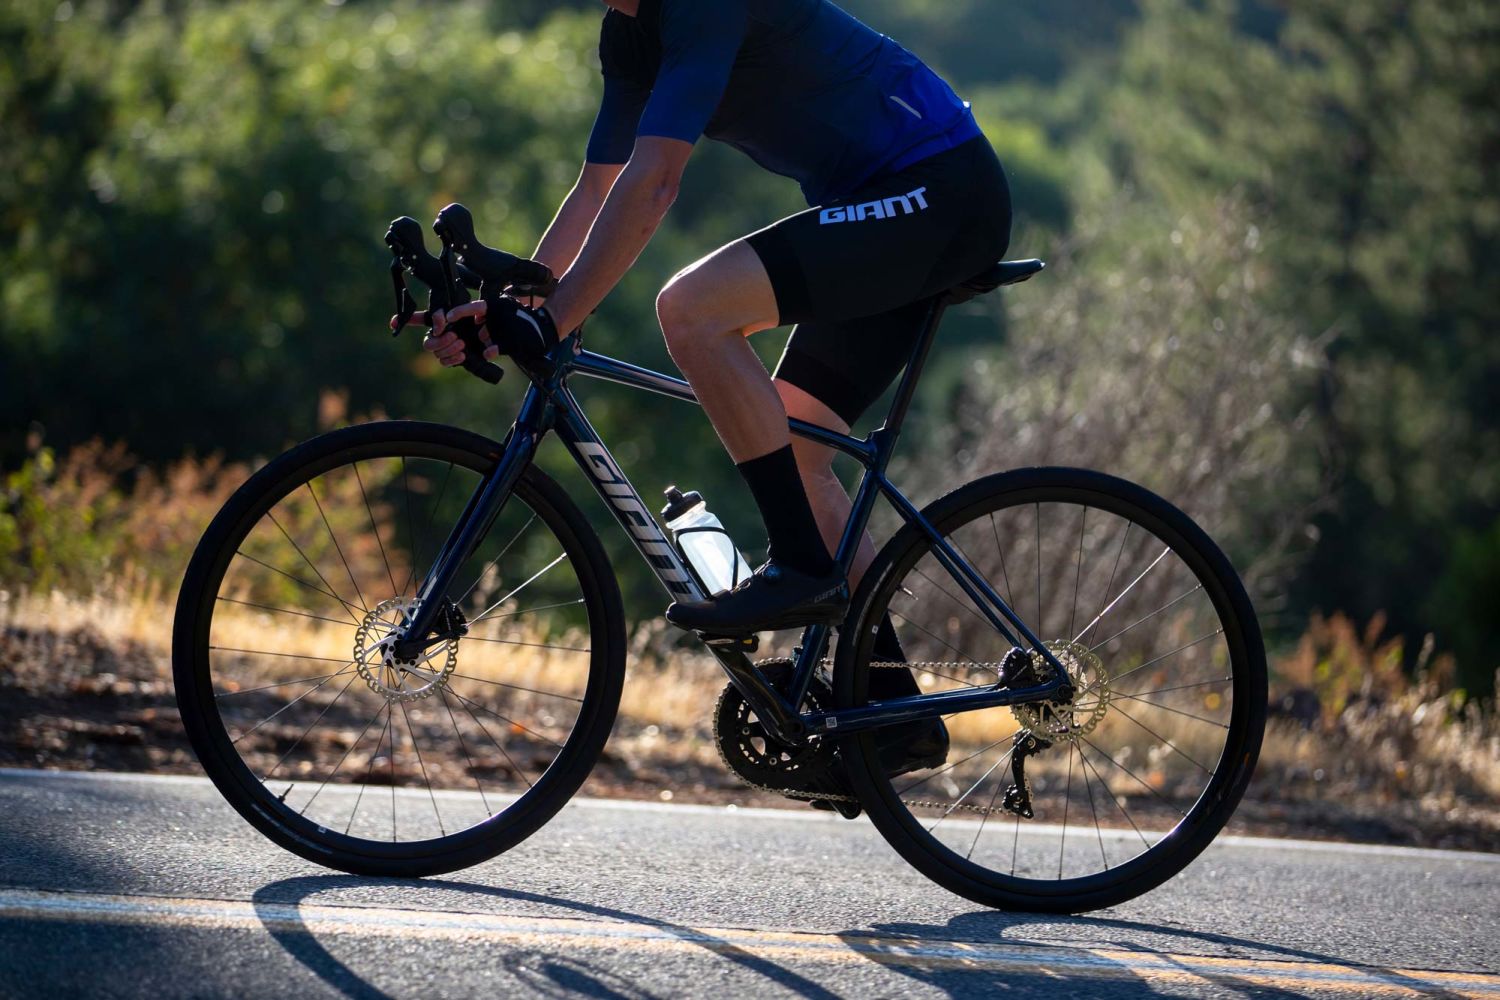 Contend AR Impresses BikeRadar with "Lovely AllRound Ride" Giant